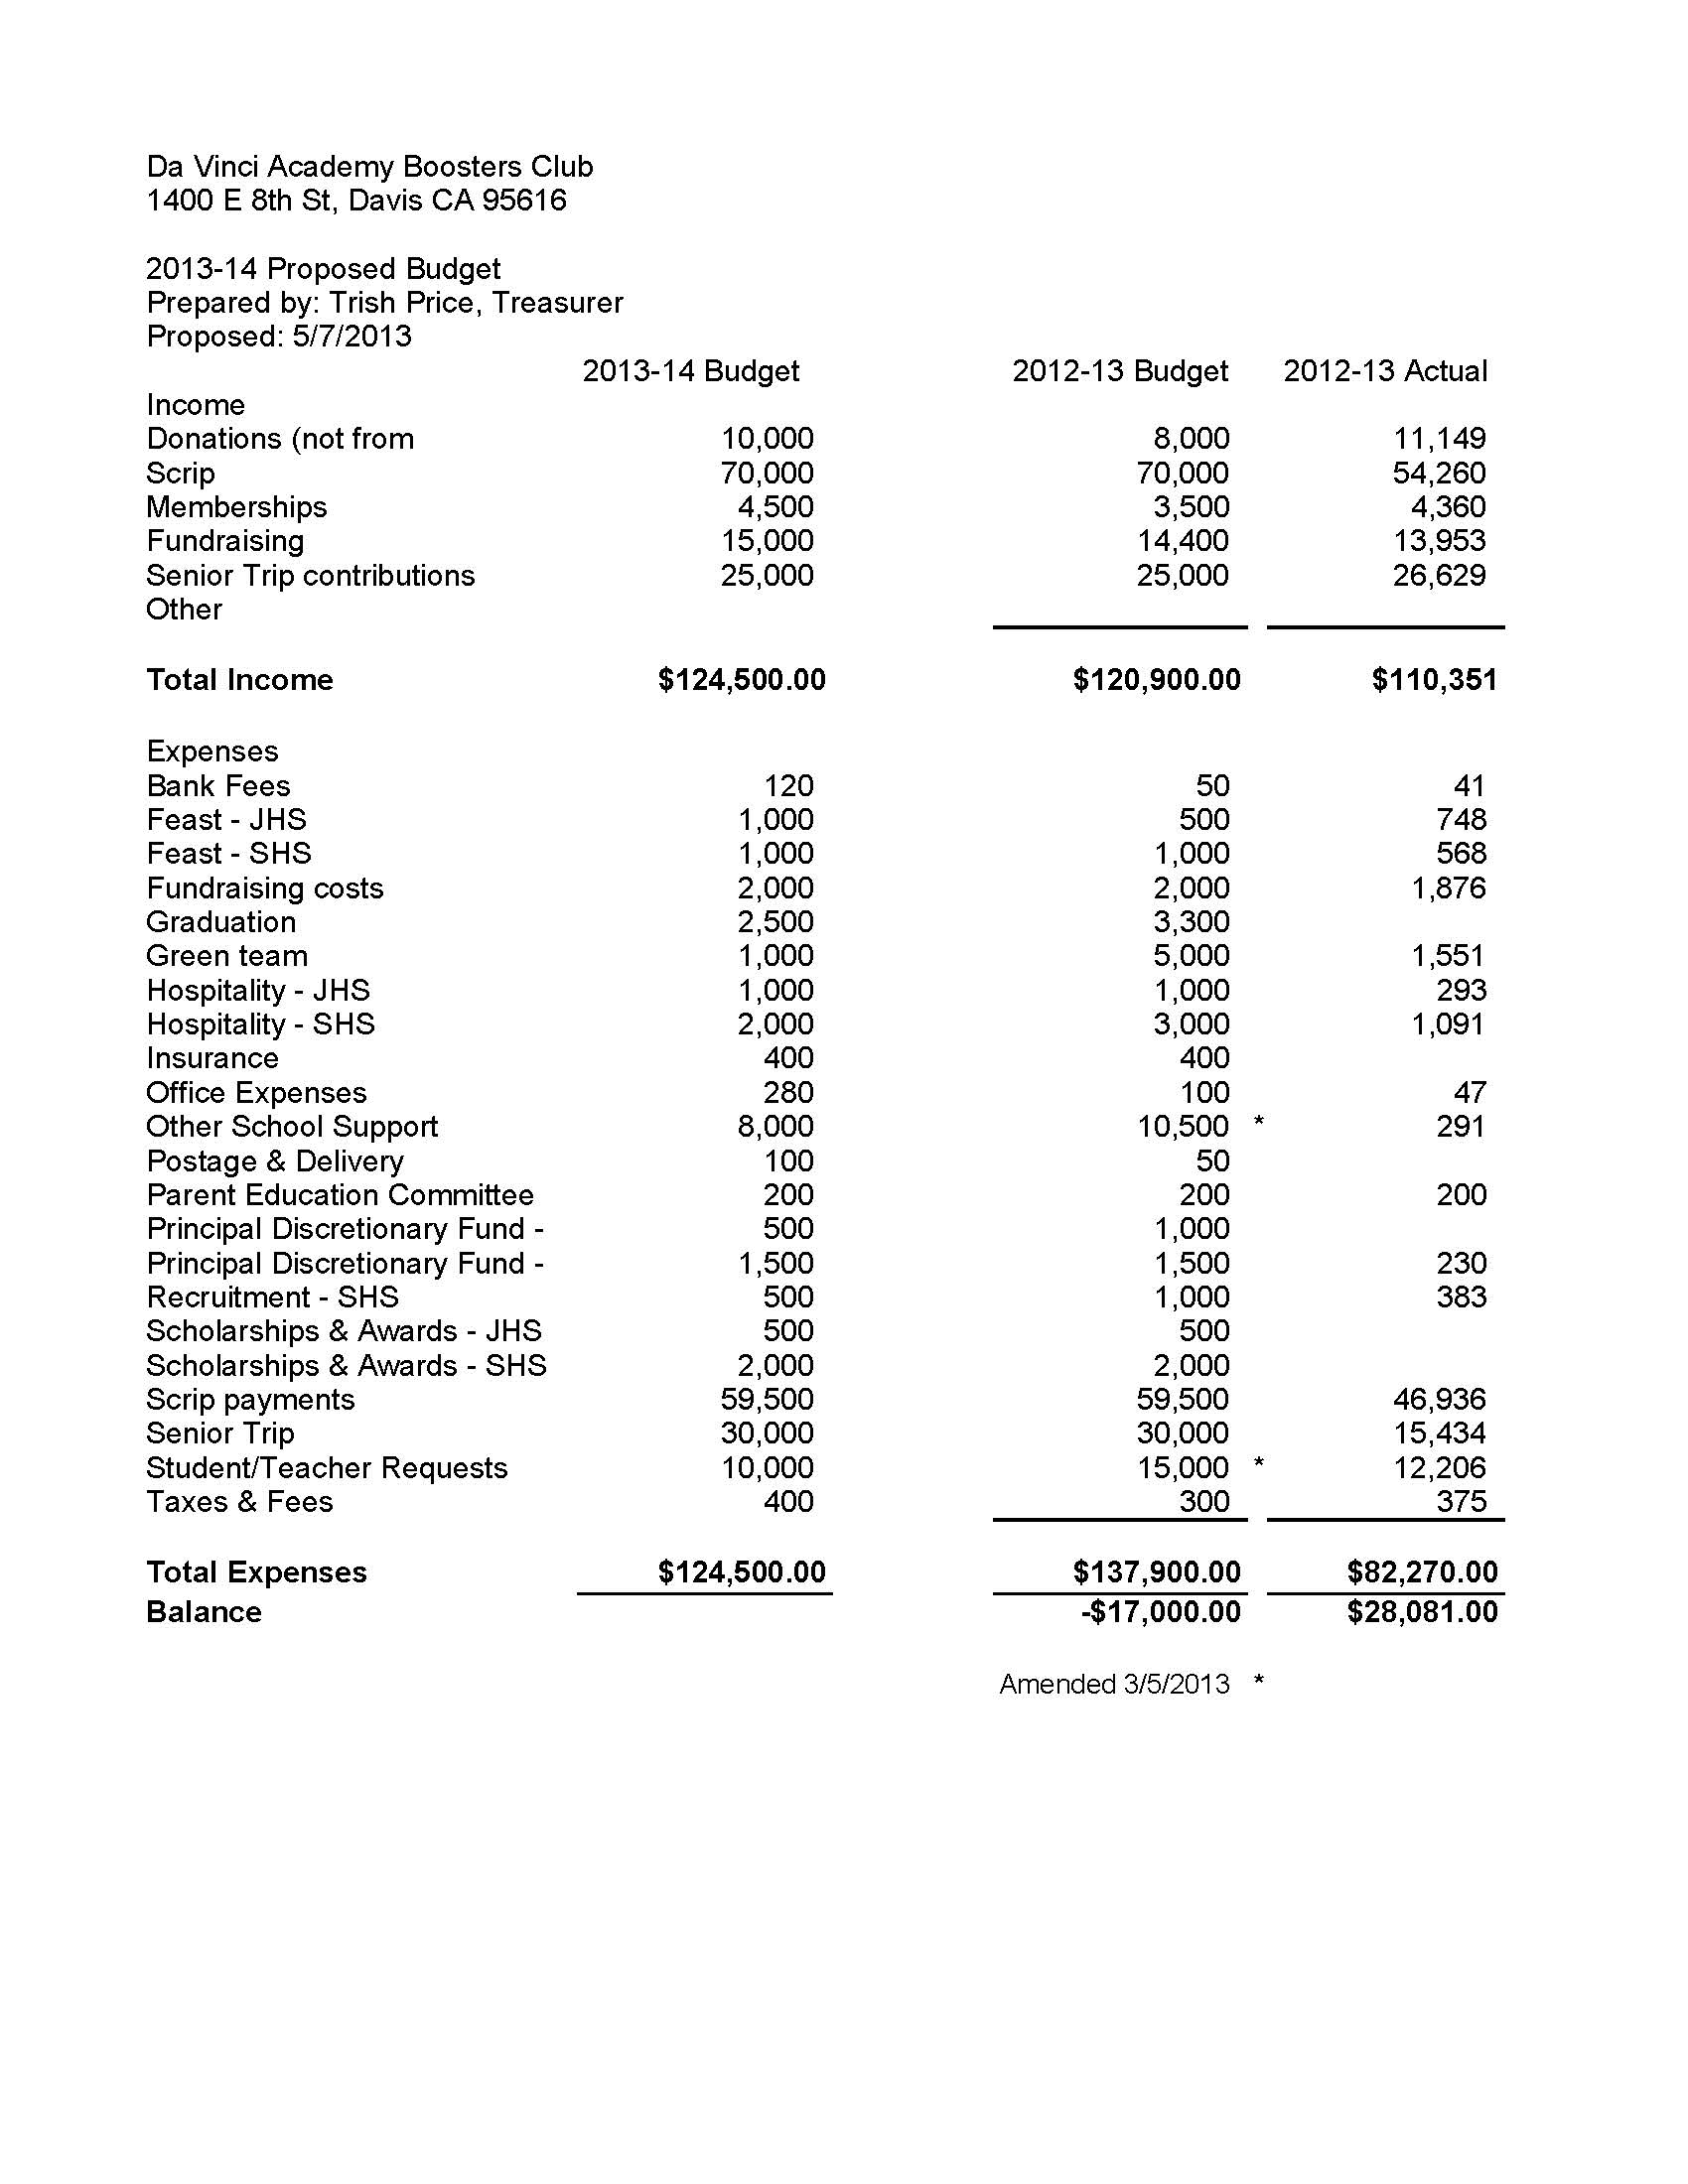 Officers and Proposed Budget